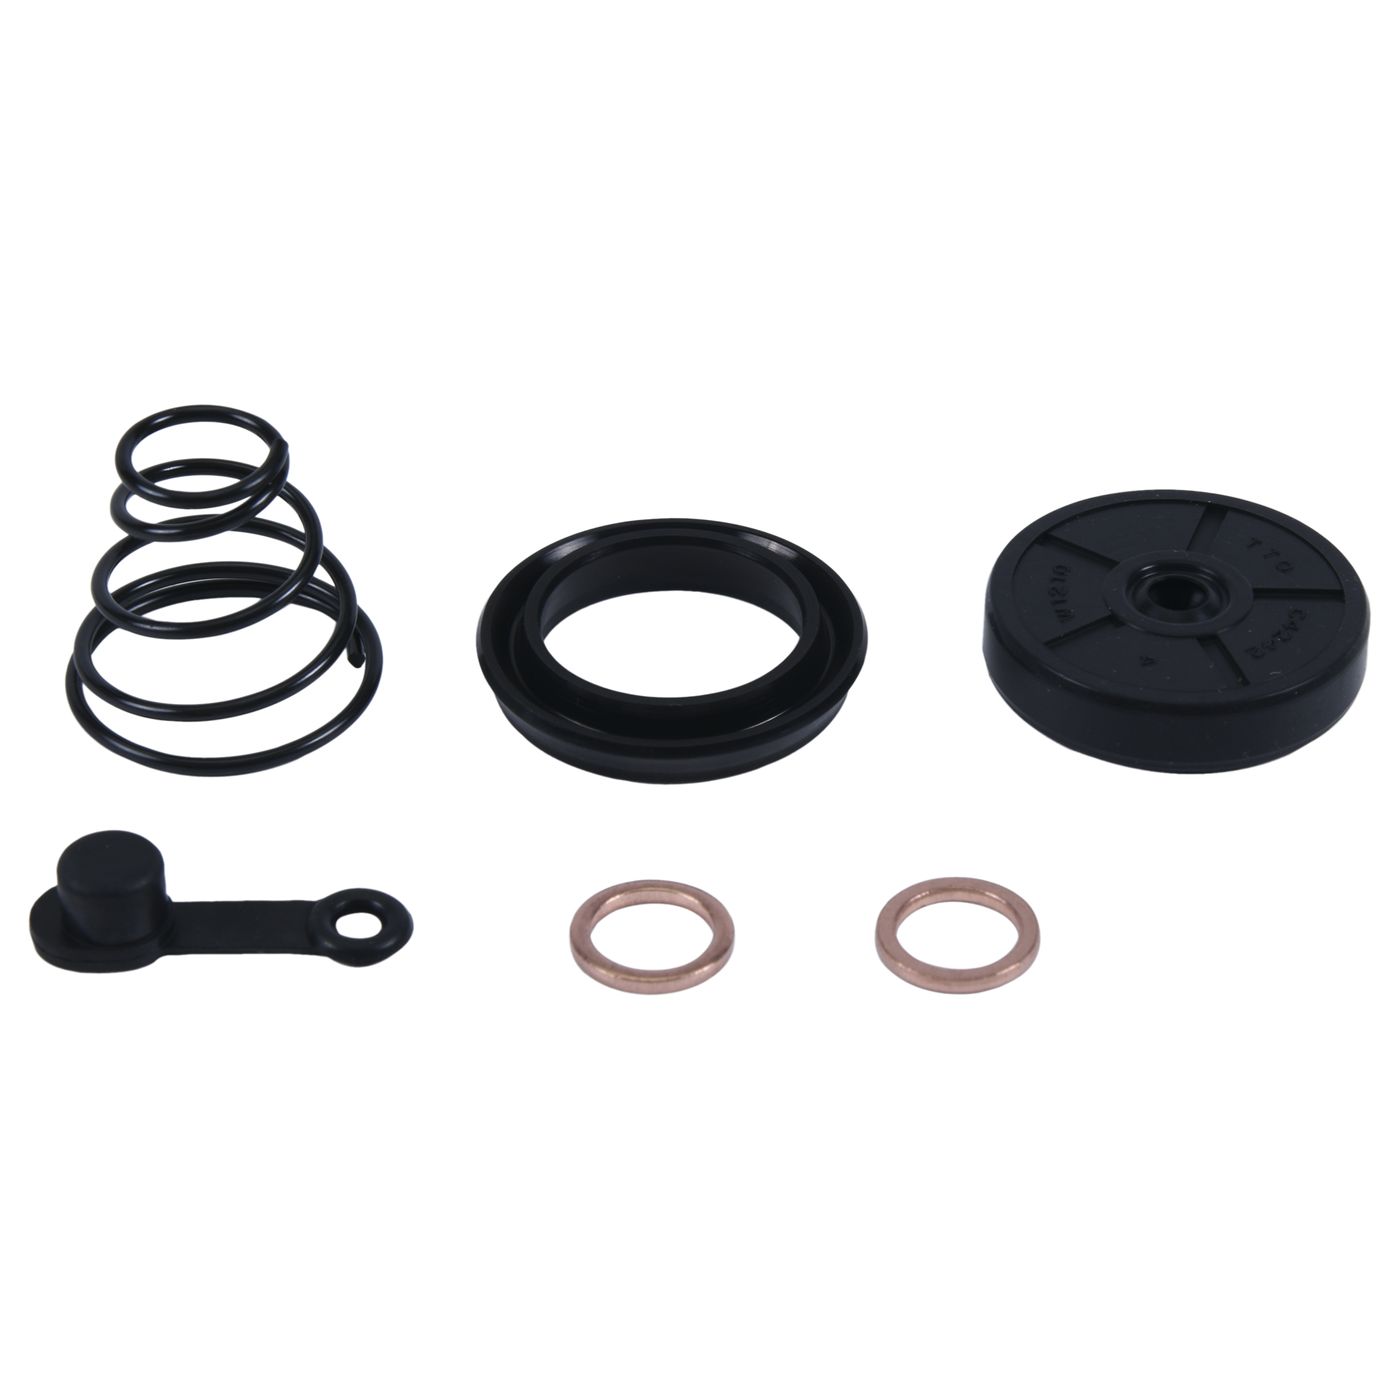 Wrp Clutch Slave Cylinder Kits - WRP186026 image